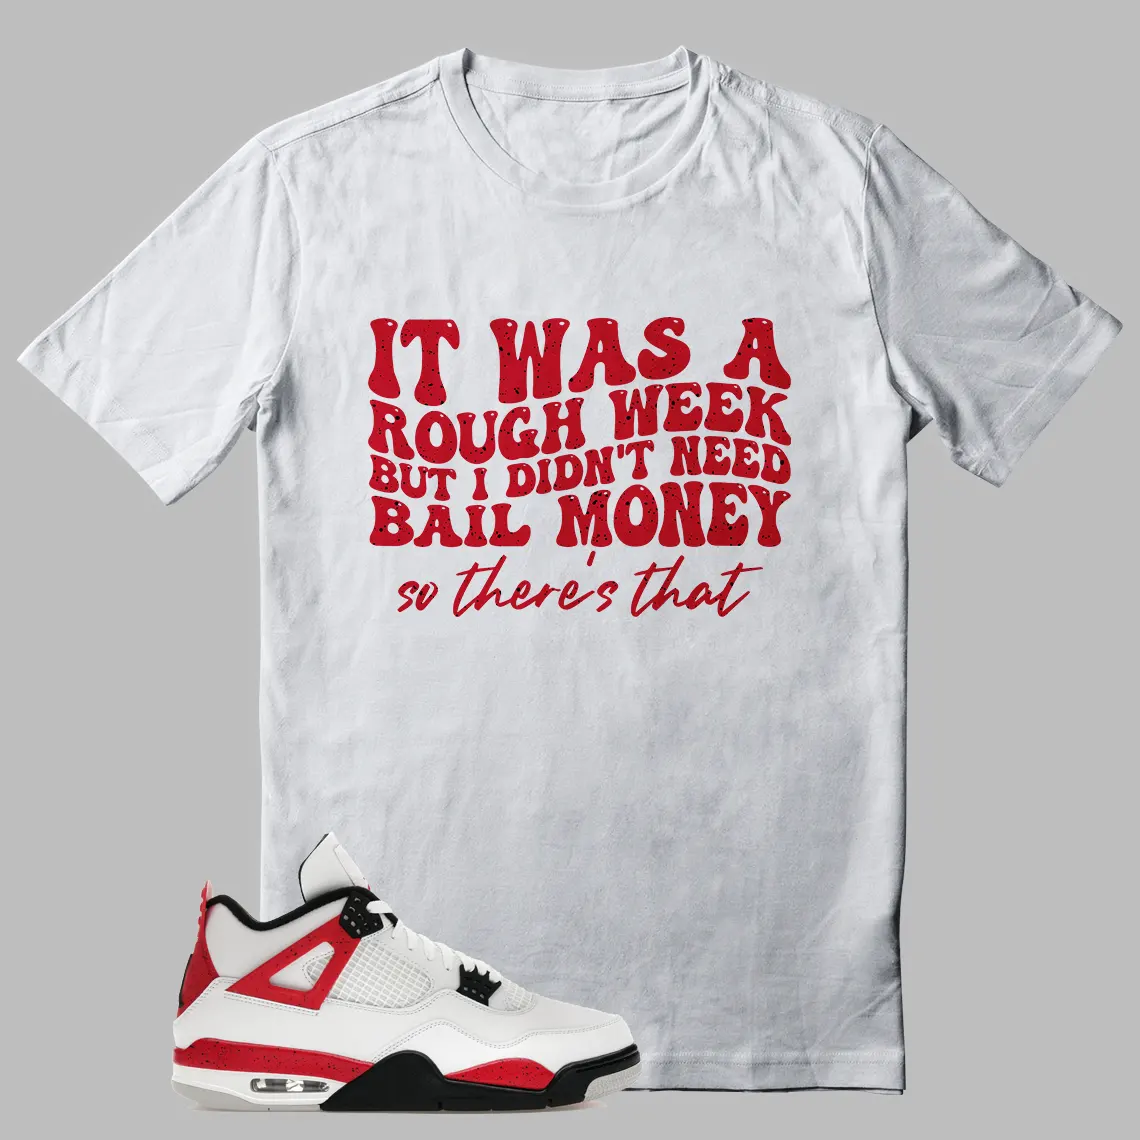 J4 Red Cement Outfit Shirt Funny Rough Week Graphic